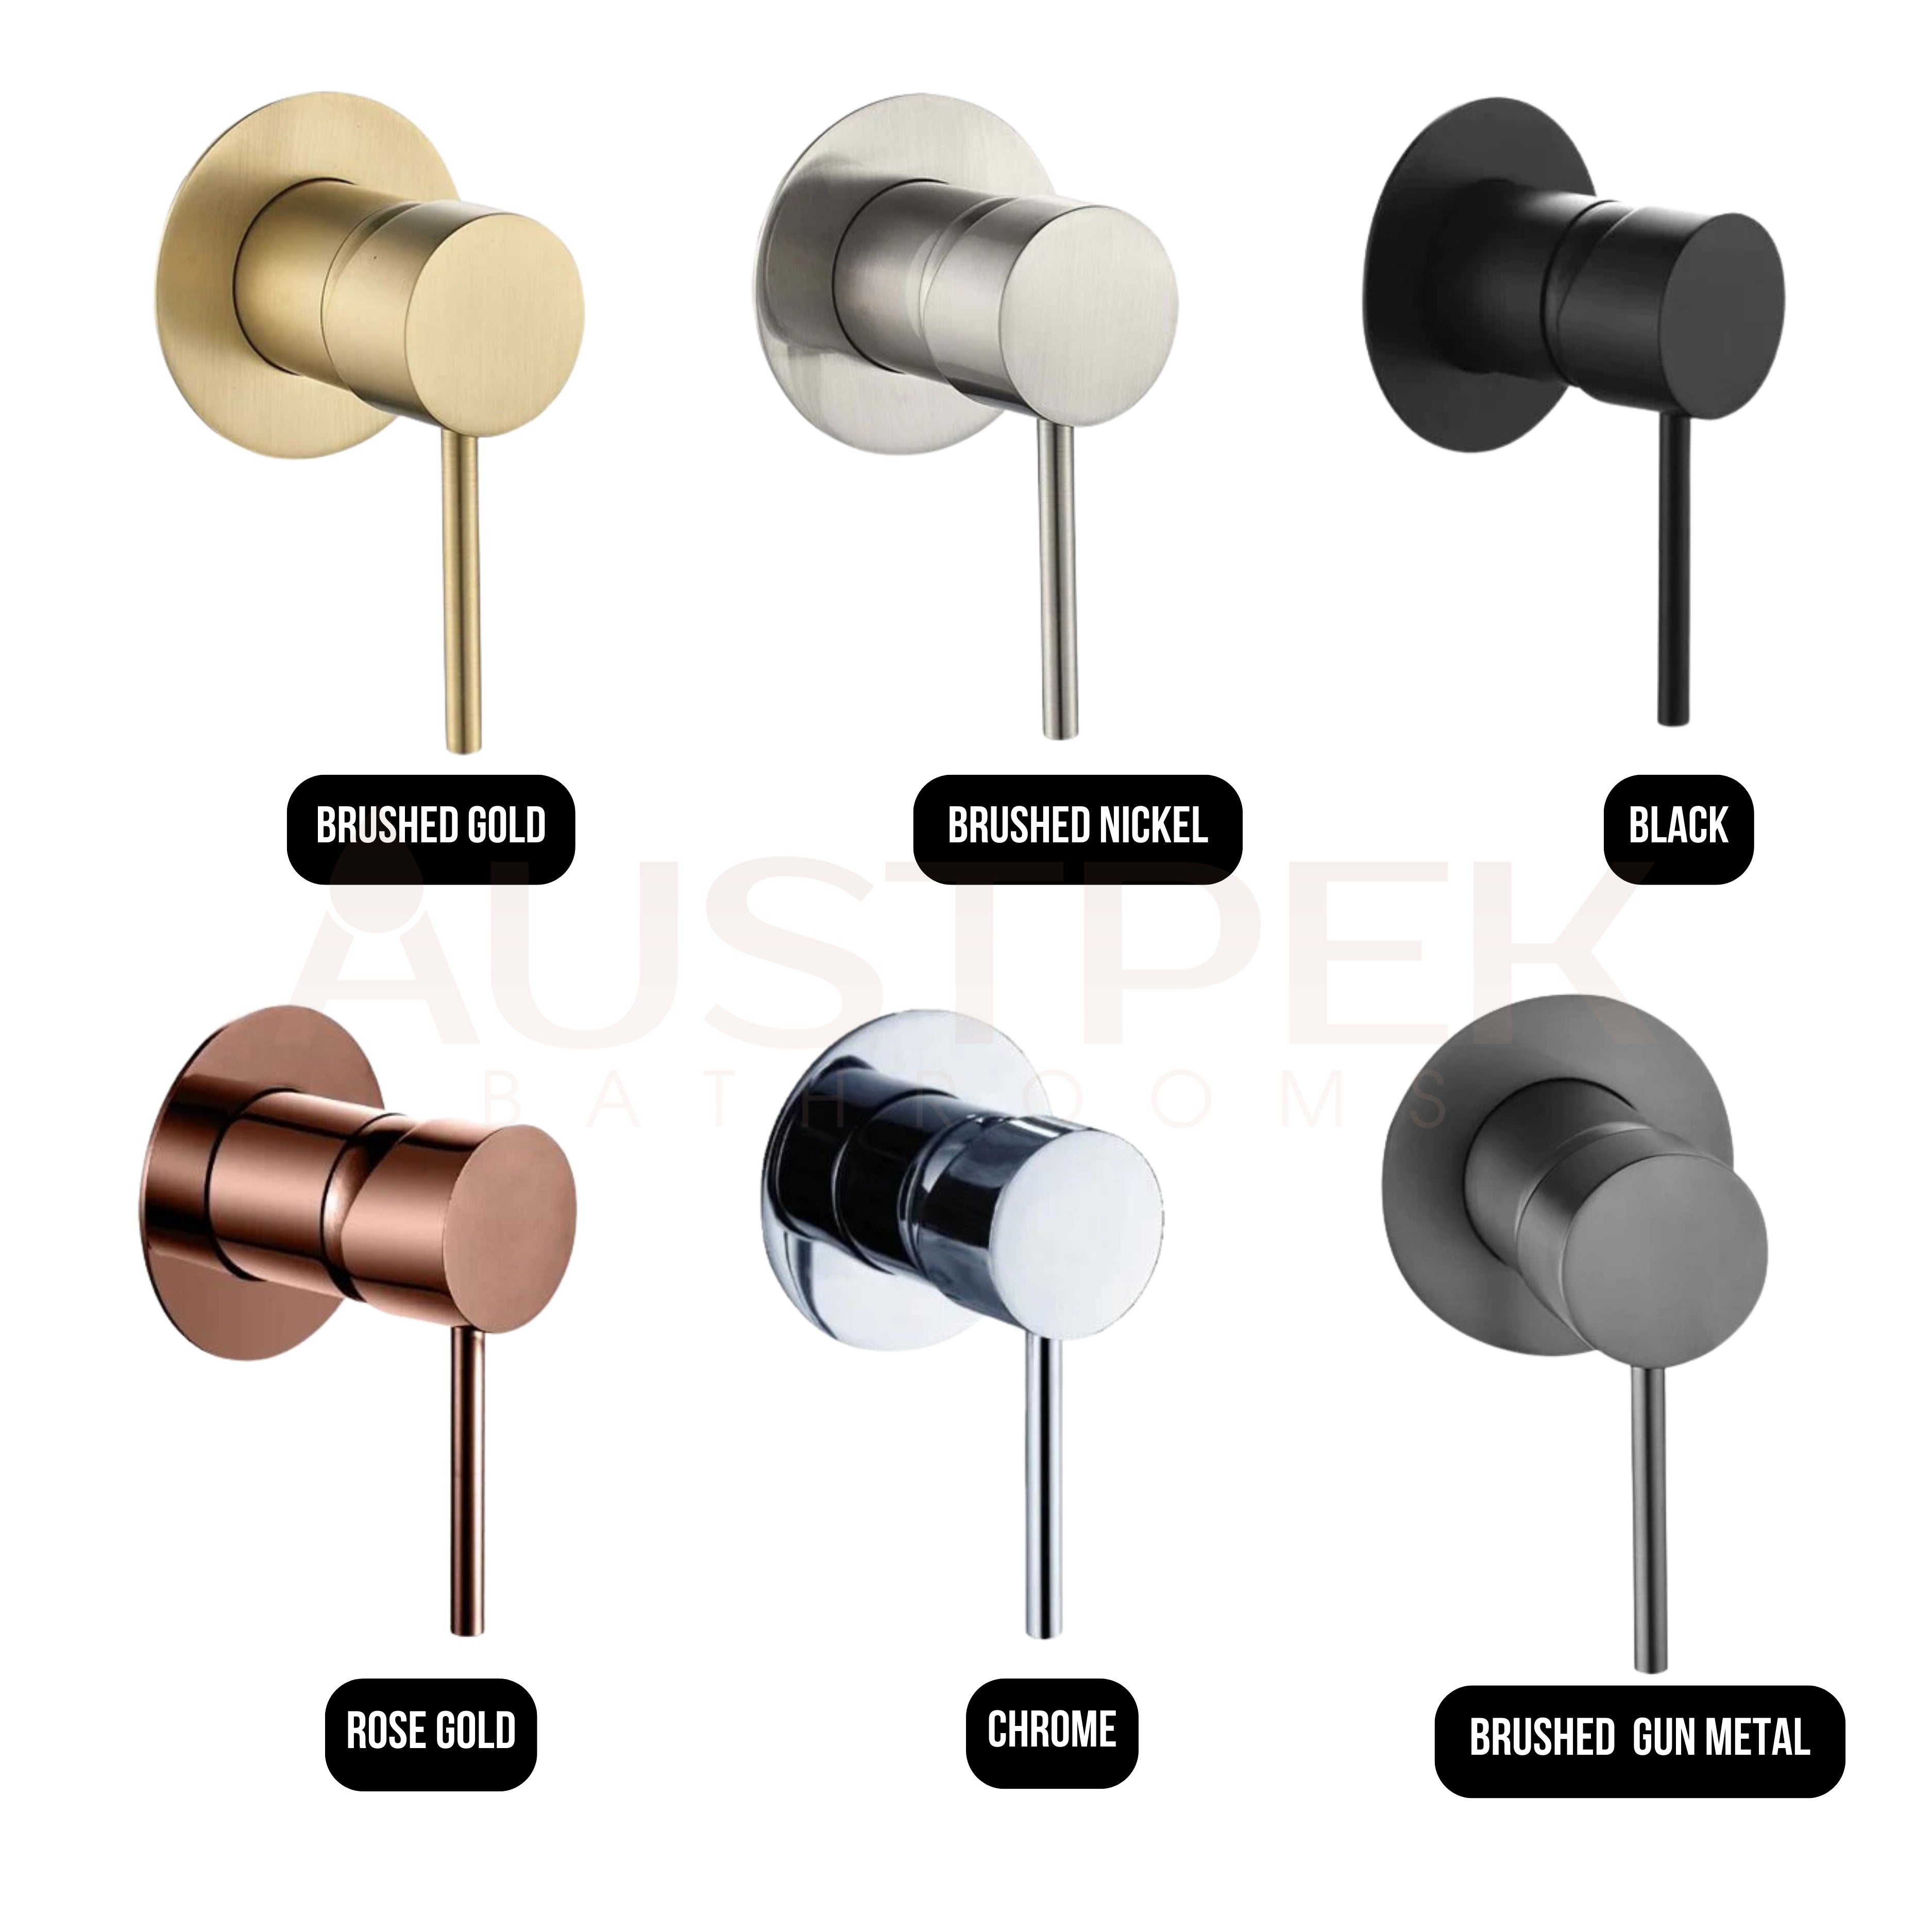 HELLYCAR IDEAL WALL MIXER BRUSHED GOLD 35MM